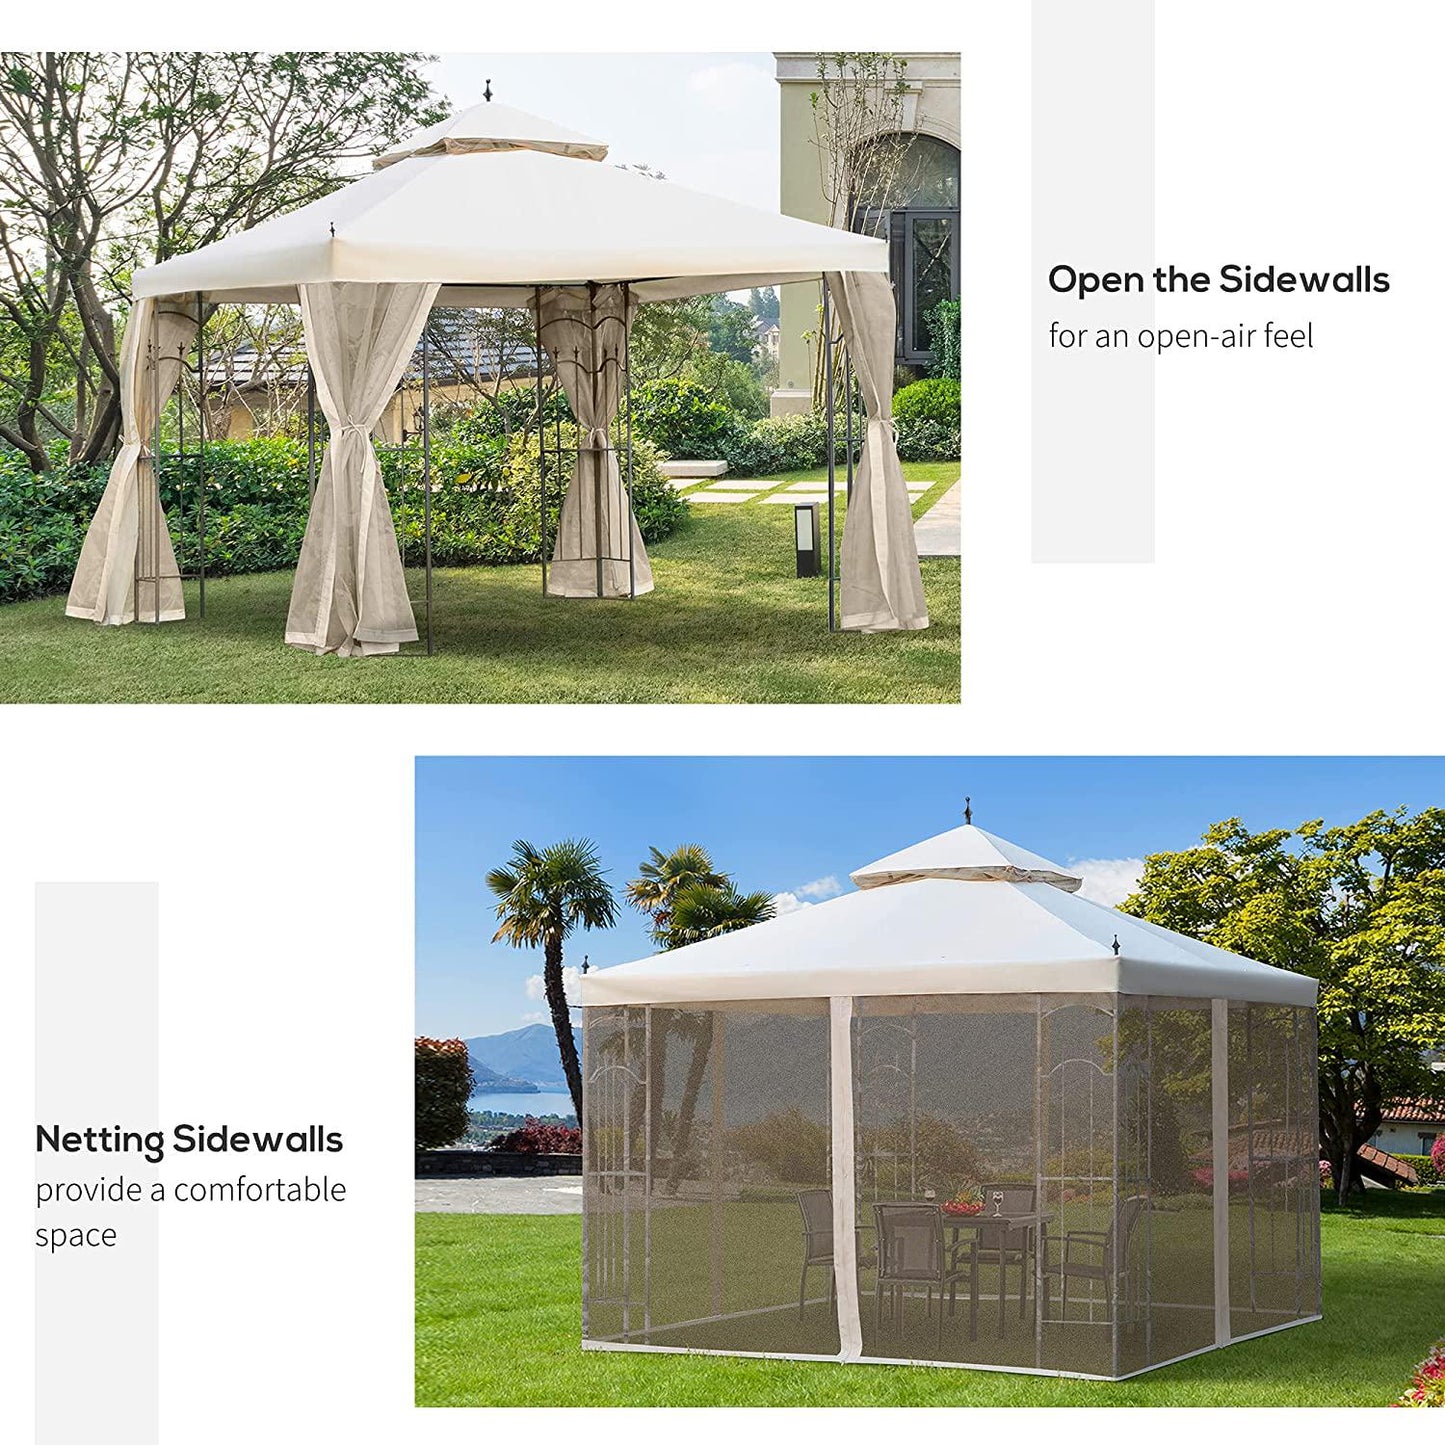 Outsunny 10&#039; x 10&#039; Patio Gazebo with Corner Frame Shelves, Double Roof Outdoor Gazebo Canopy Shelter with Netting, for Patio, Wedding, Catering and Events, Cream White